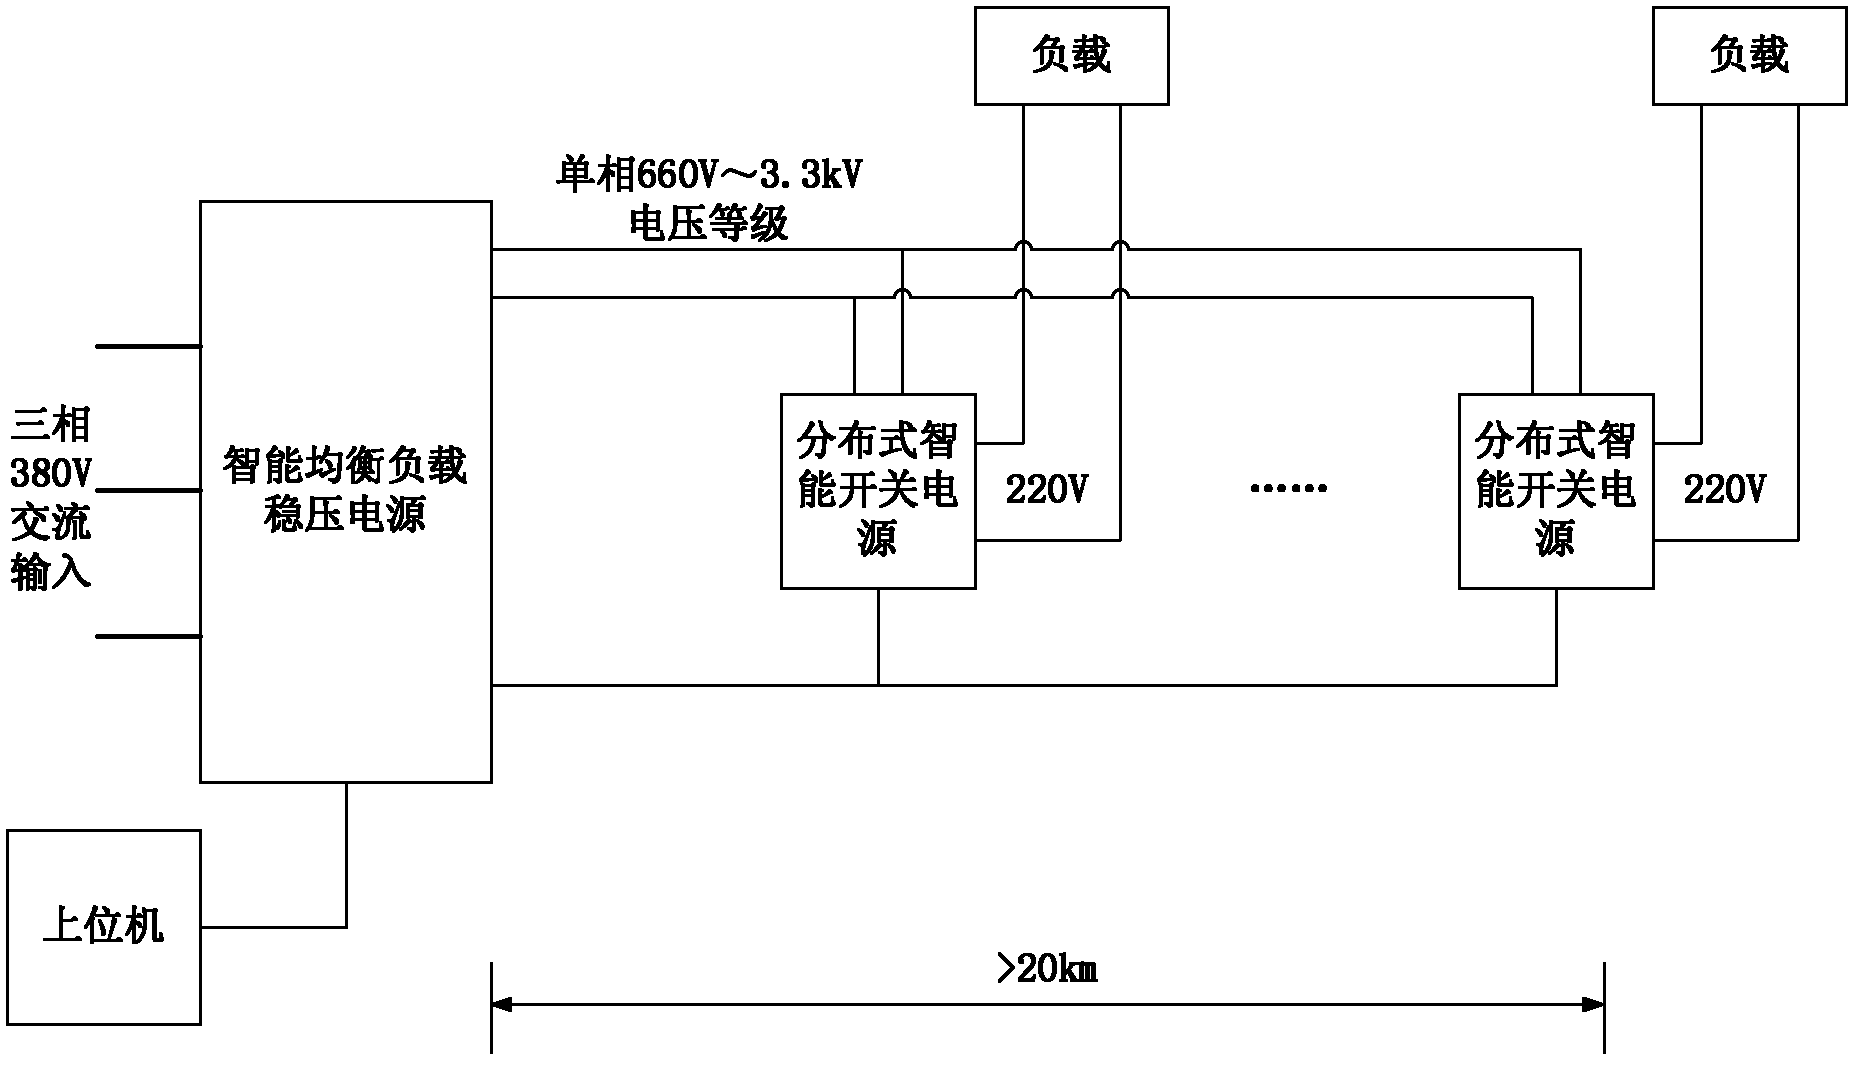 Single-phase 660V-3.3KV long-distance distributed direct power supply system